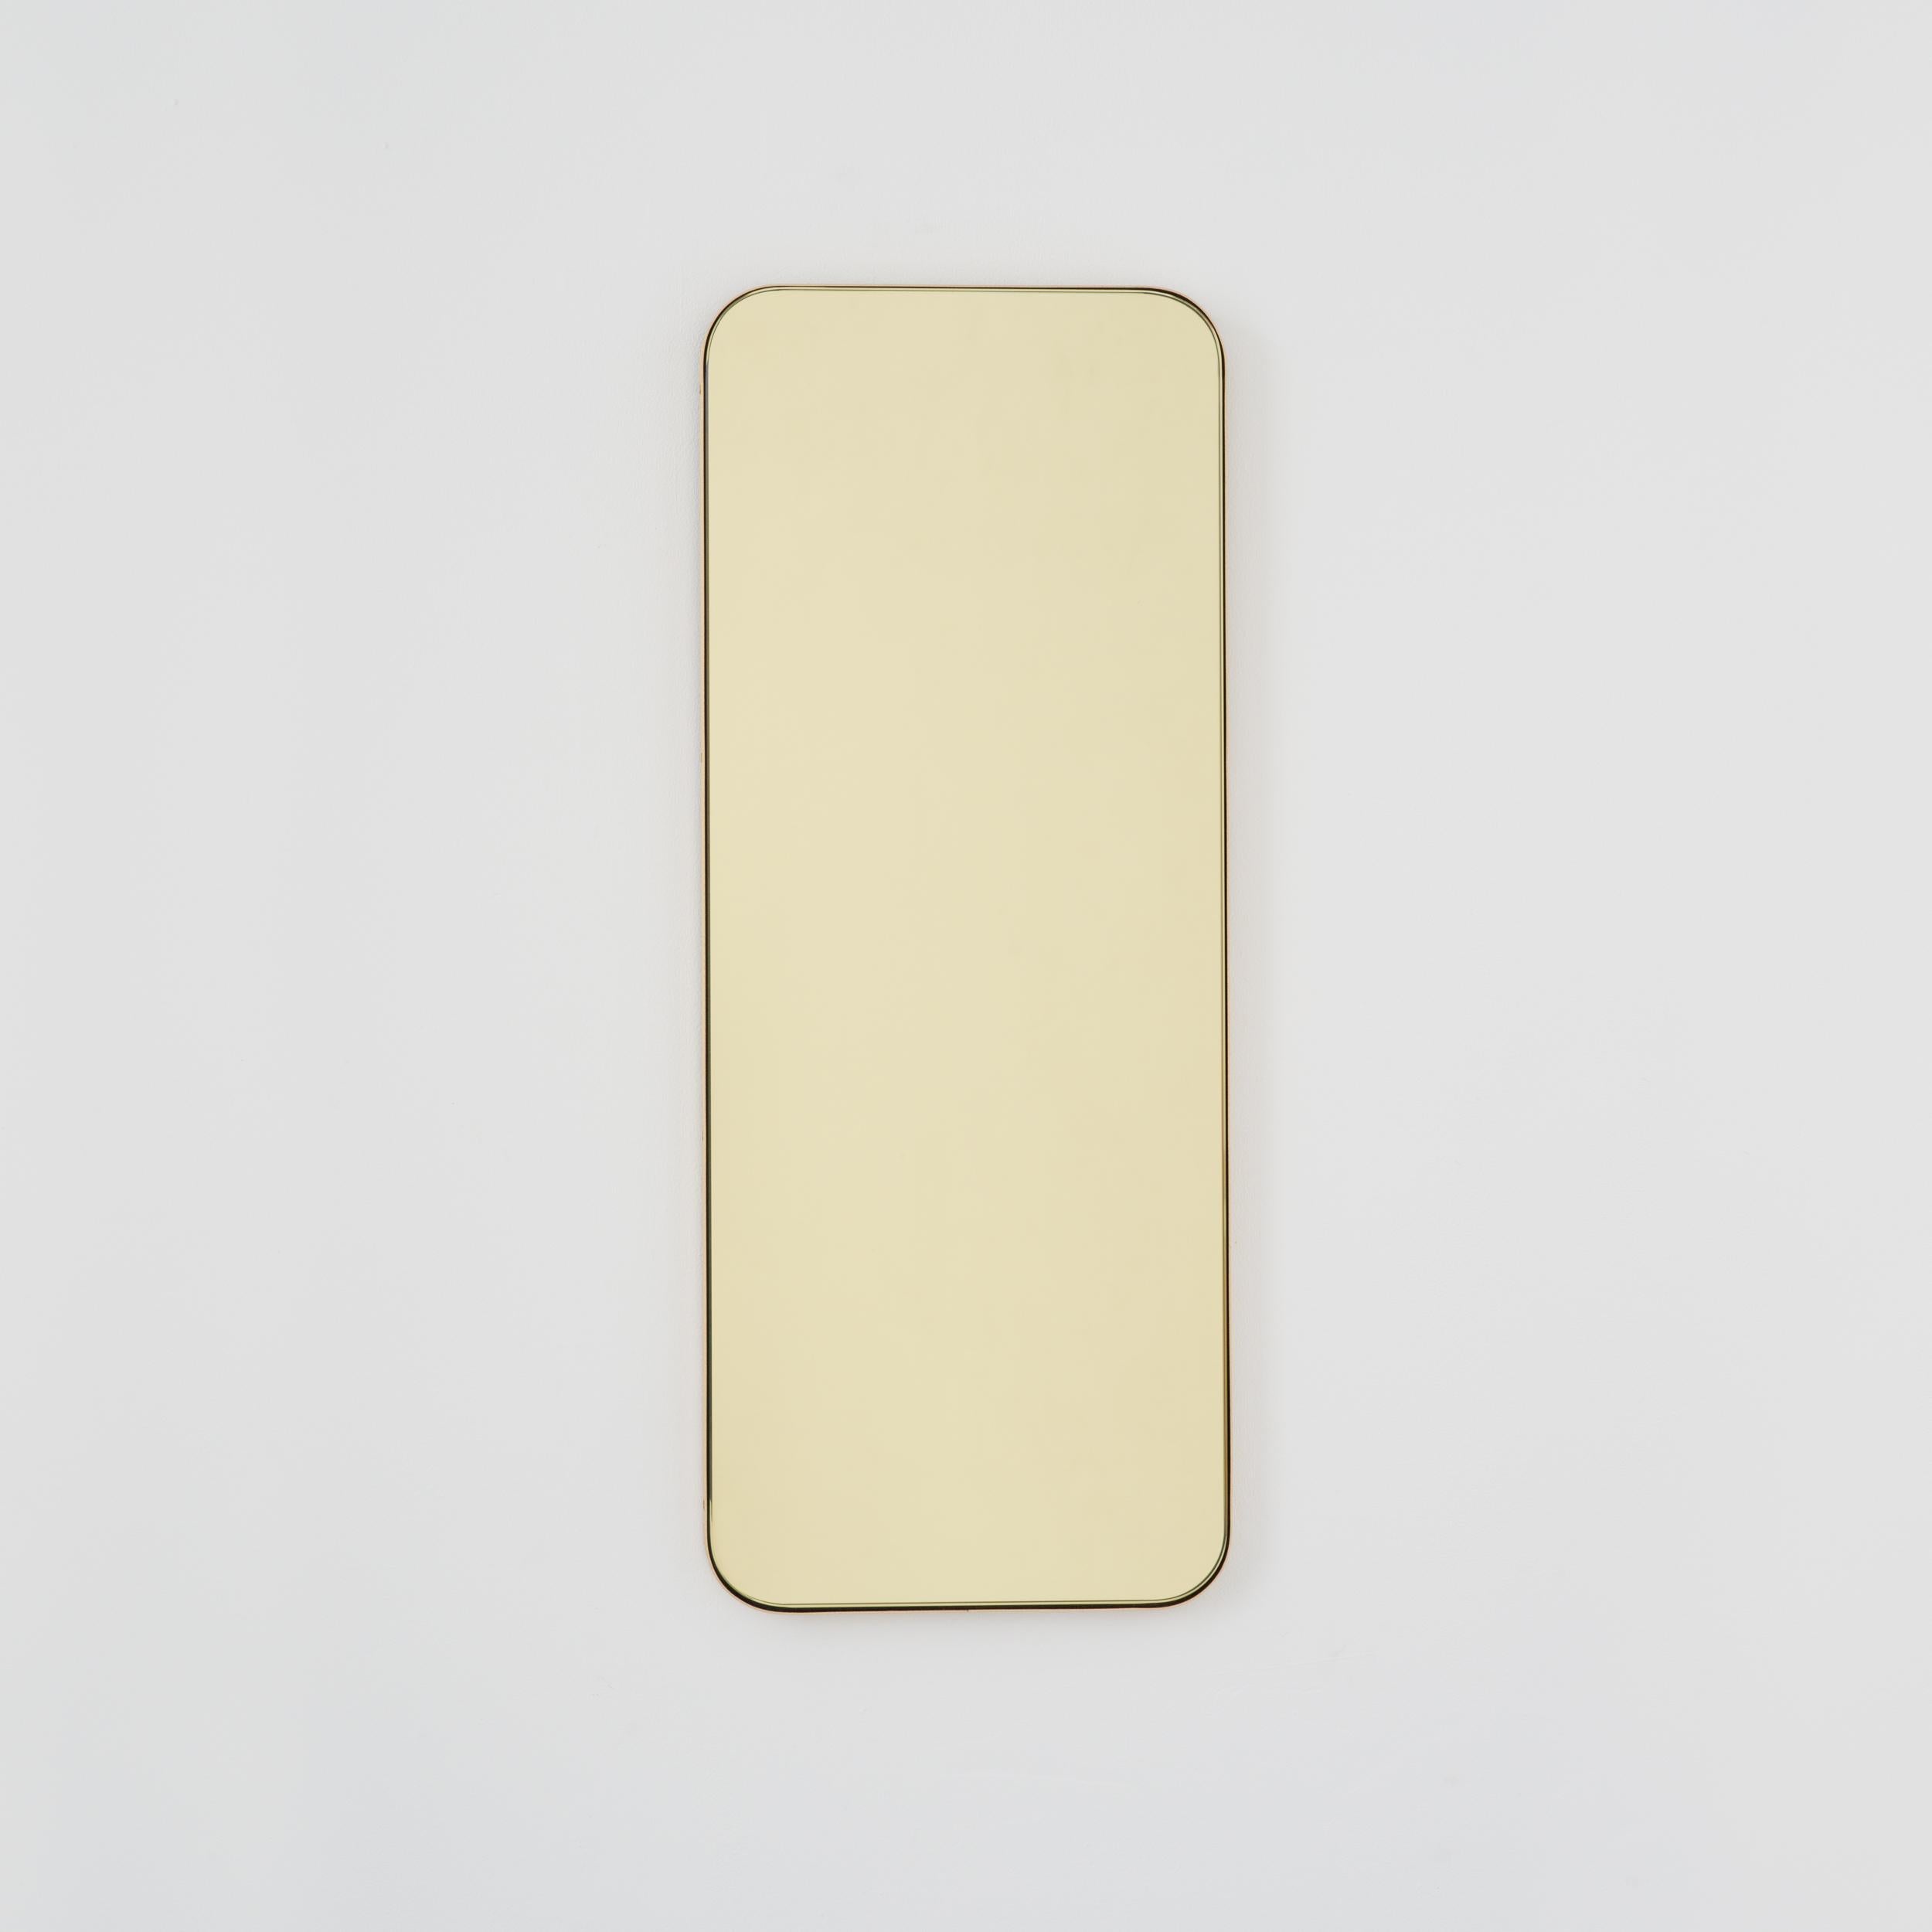 British Quadris Gold Tinted Rectangular Contemporary Mirror with a Brass Frame, Small For Sale